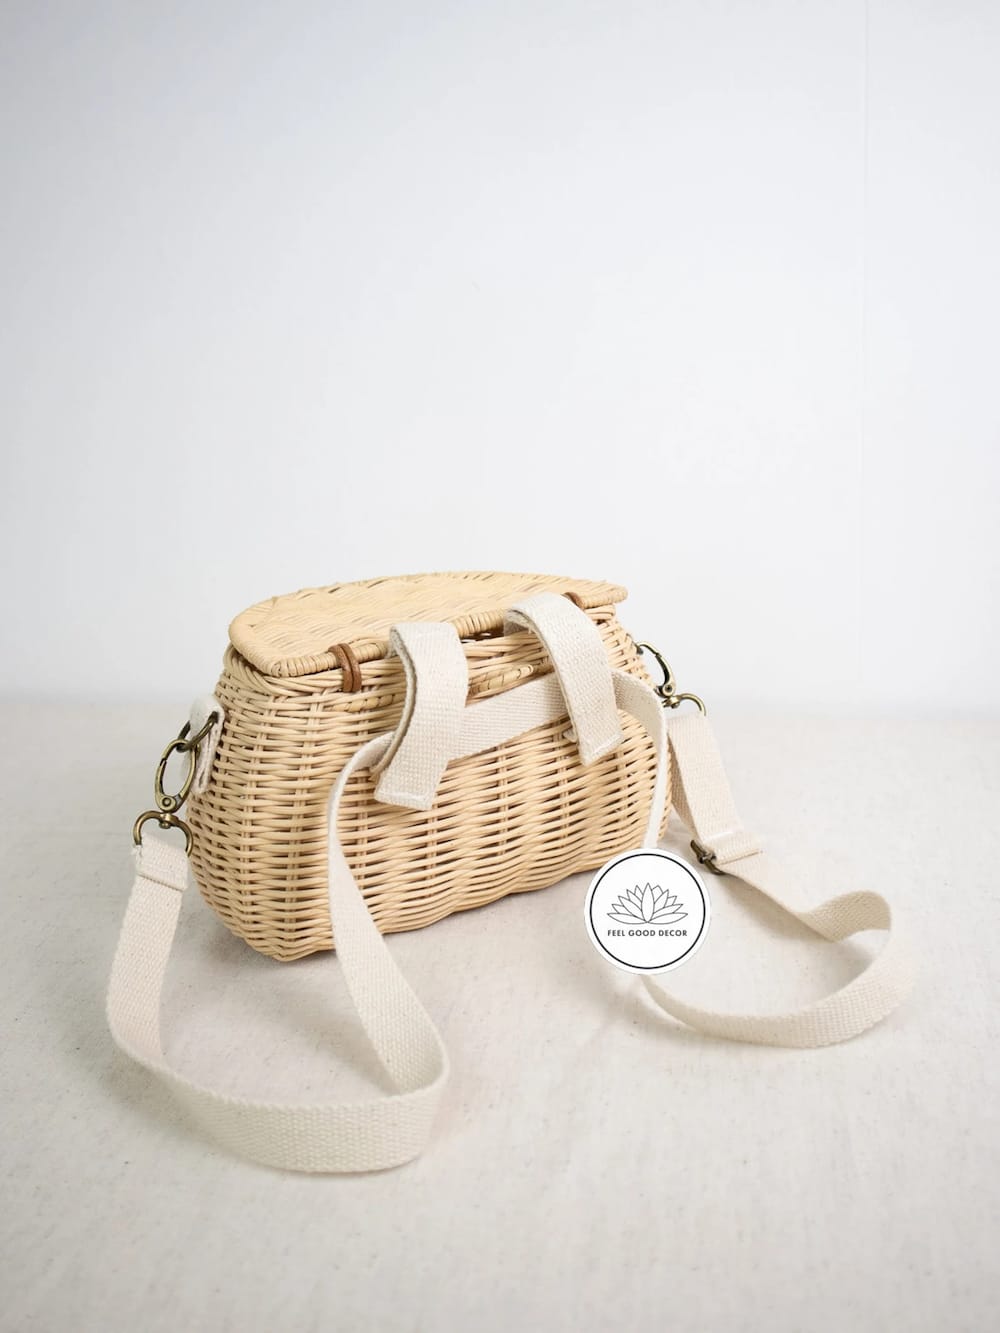 Straw Backpack, Rattan Backpack, Wicker Backpack, Basket Backpack, Rattan  Bag, Straw Backpacks for Women, Straw Bag, Christmas Gift for Her 